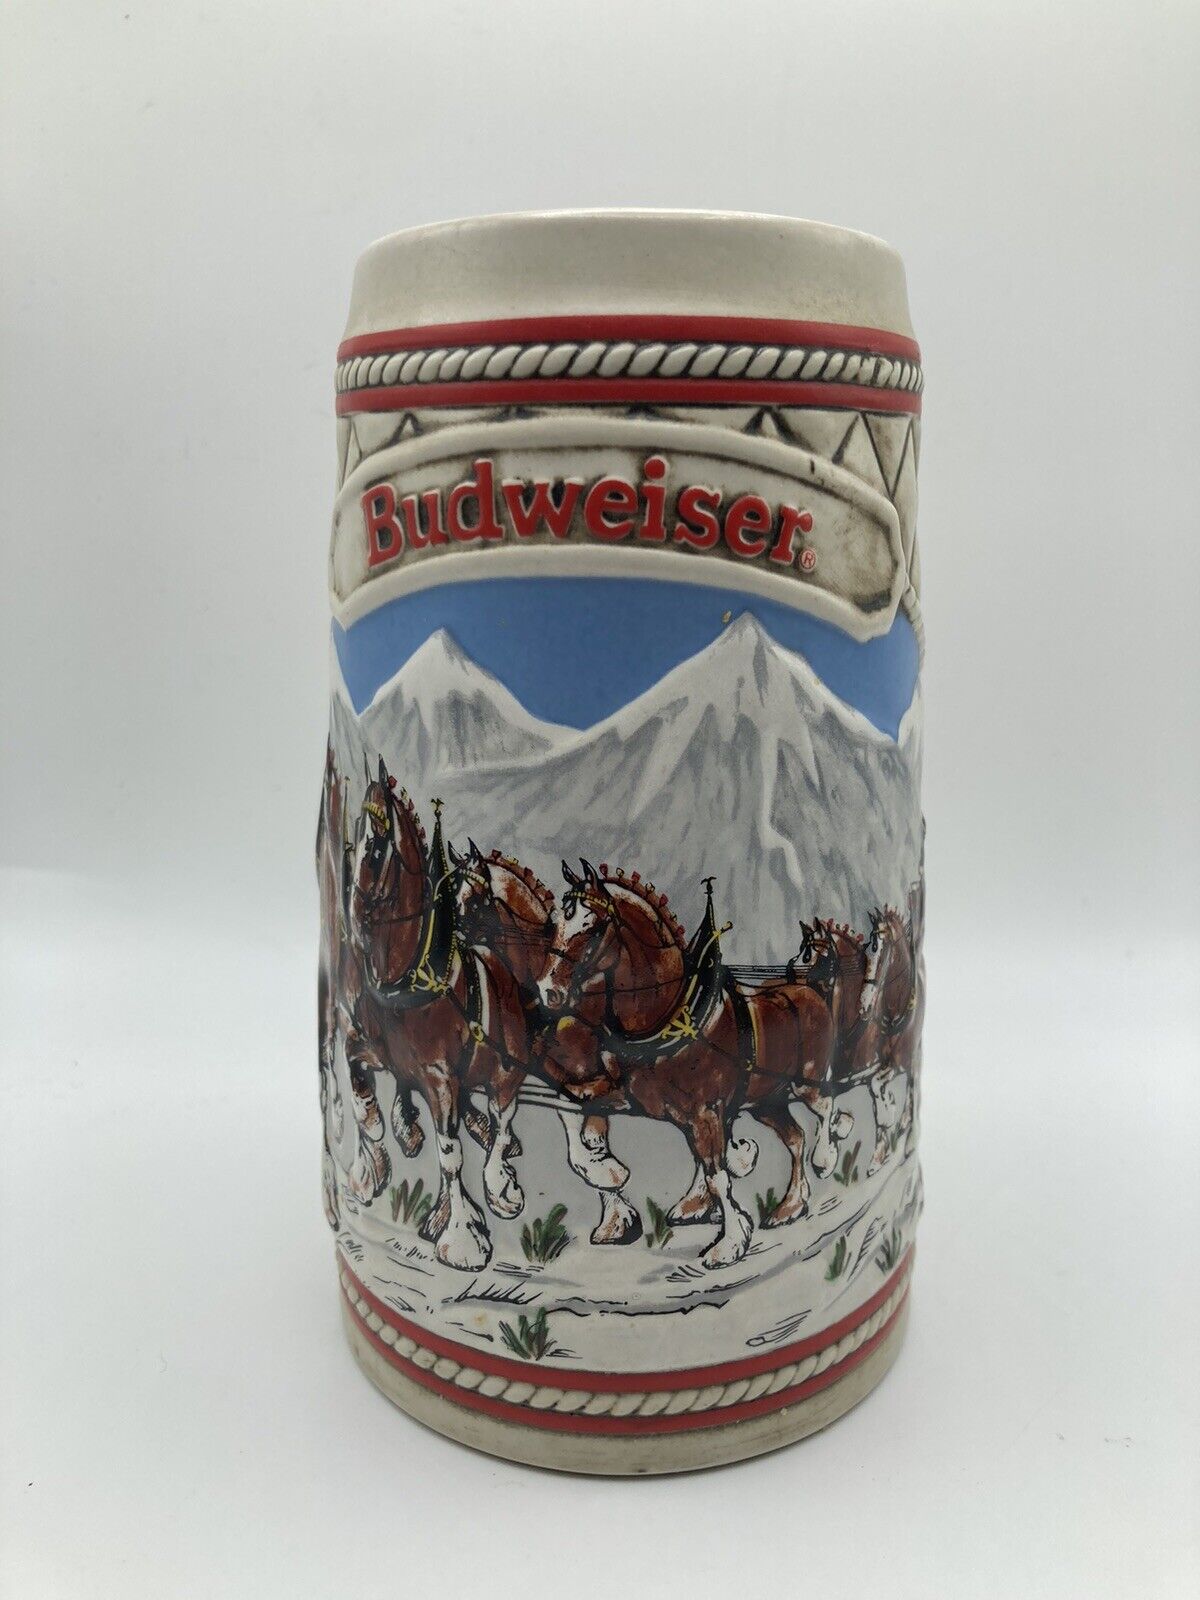 1985 Budweiser Holiday Stein- Limited Edition Handcrafted For Anheuser-Busch Inc